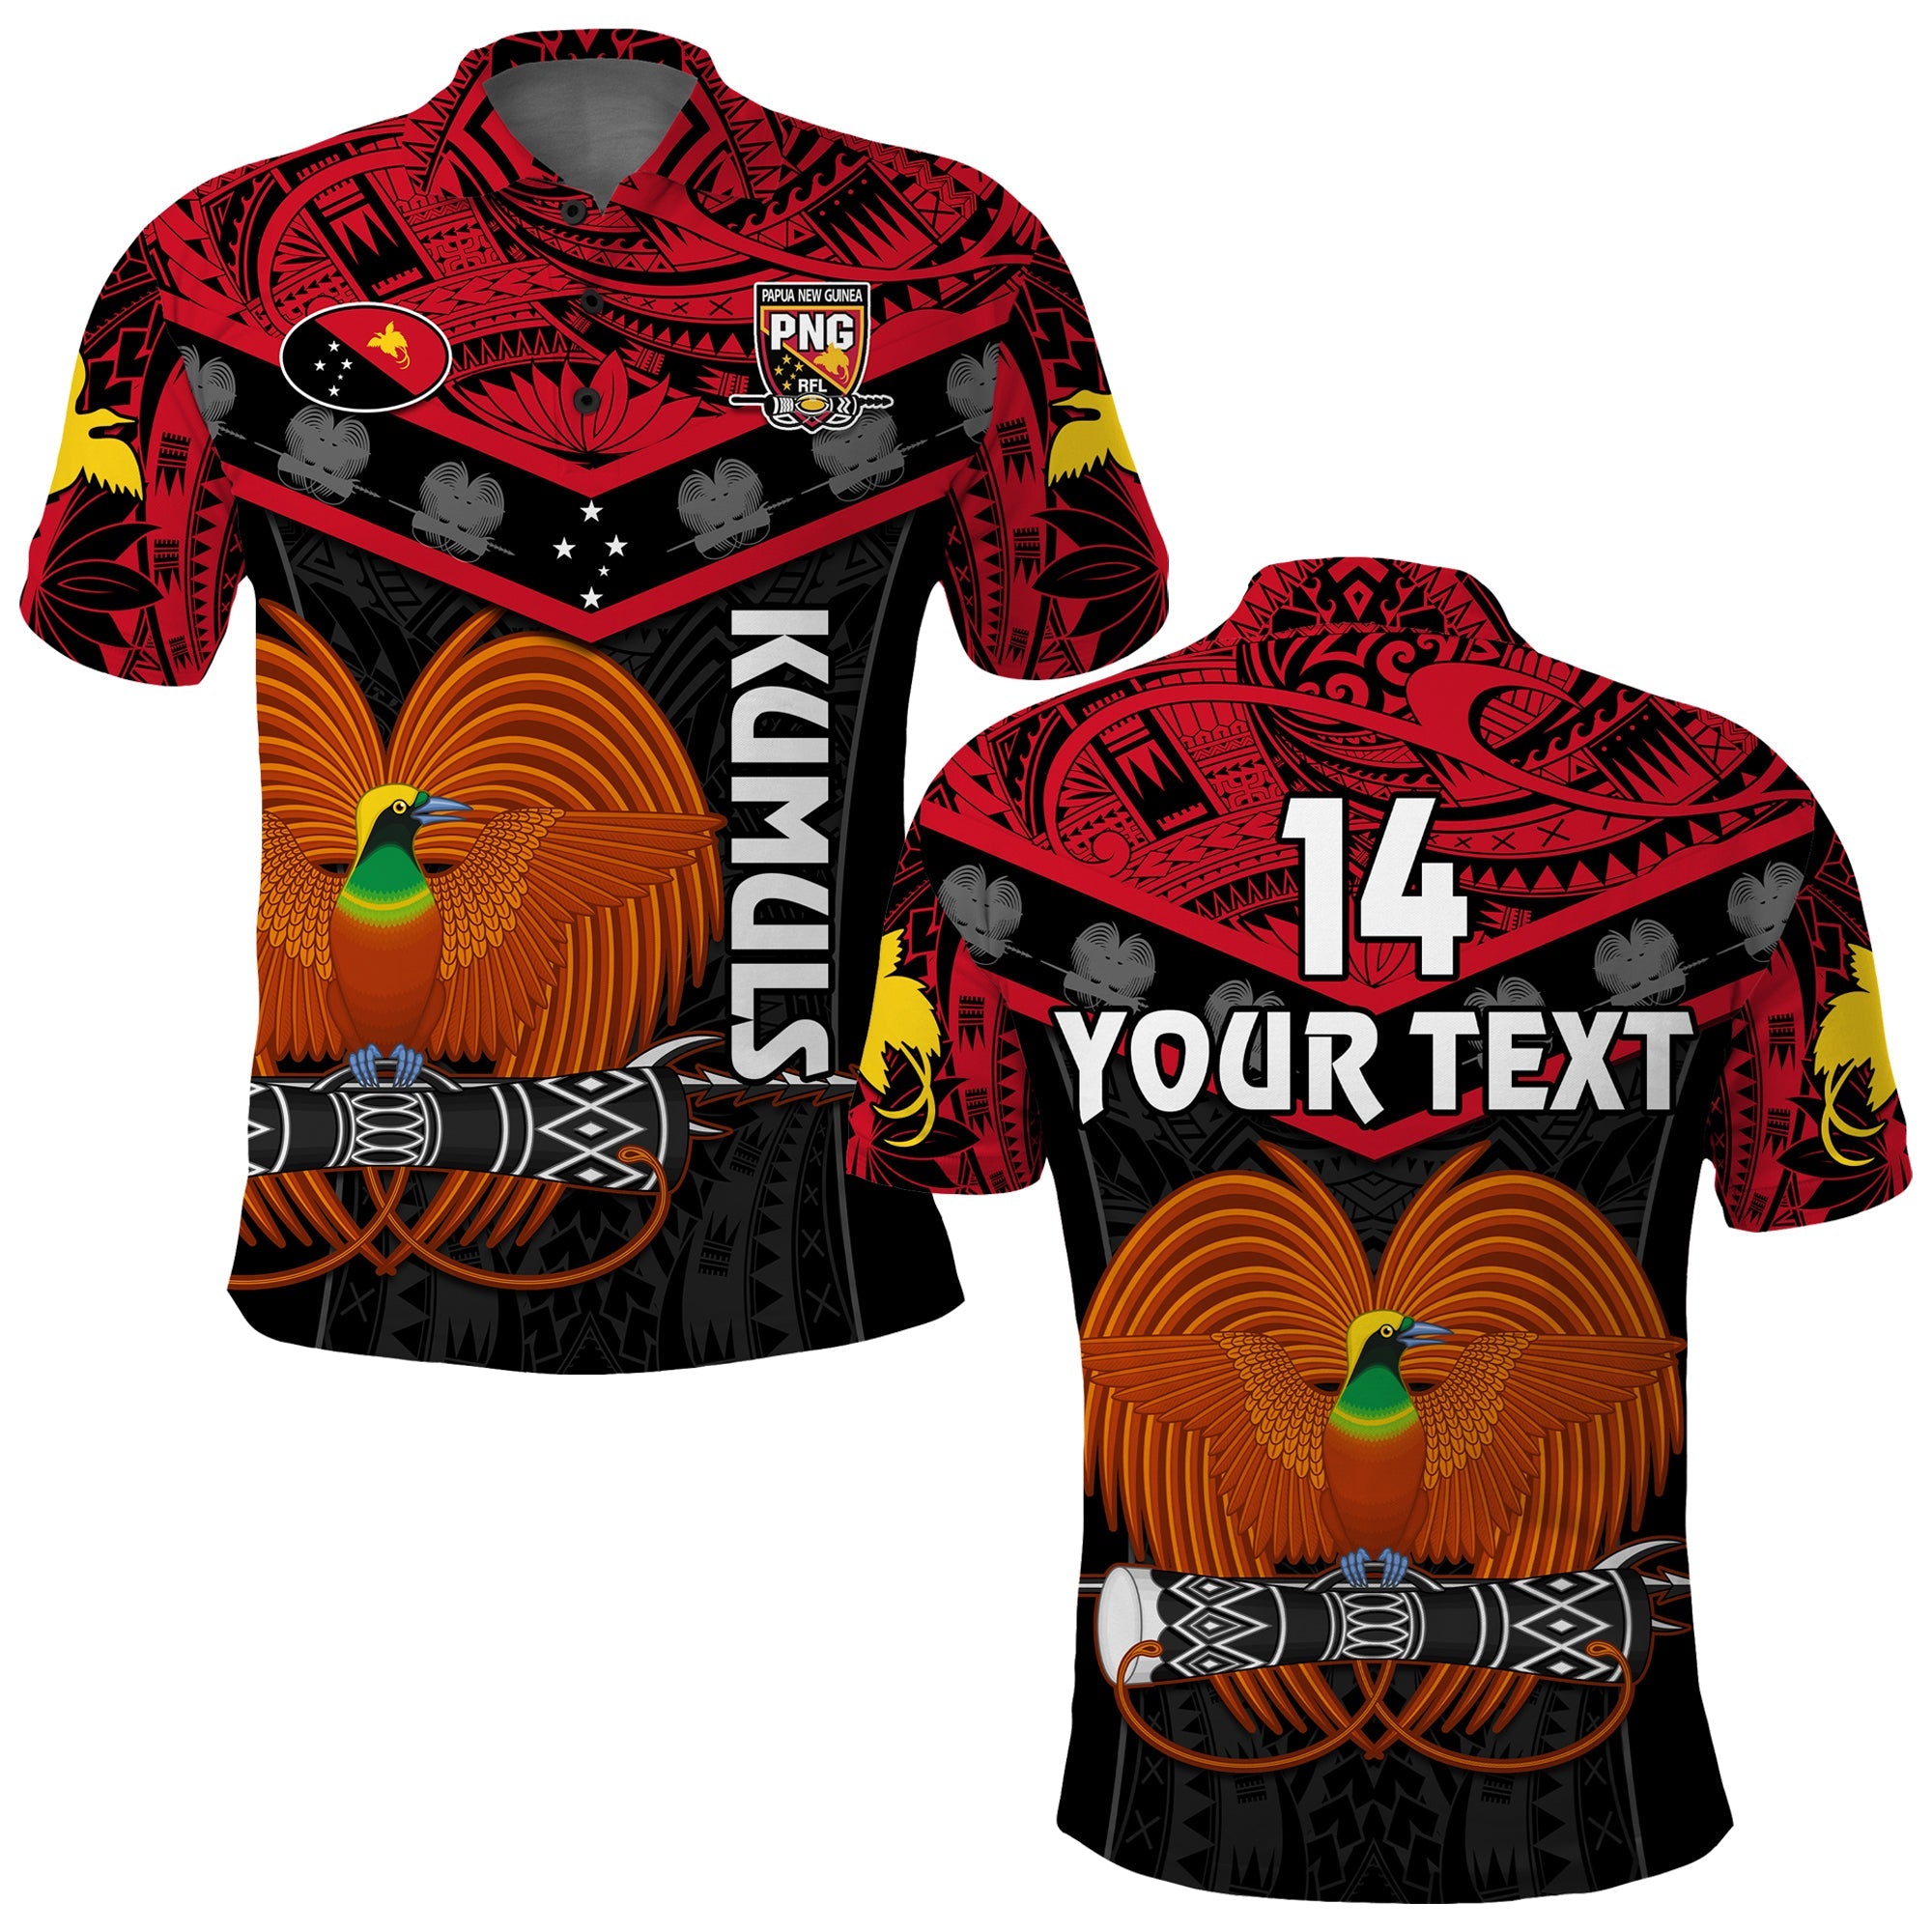 (Custom Text and Number) Papua New Guinea Rugby Polo Shirt PNG Kumuls Bird Of Paradise Black LT14 Adult Black - Polynesian Pride